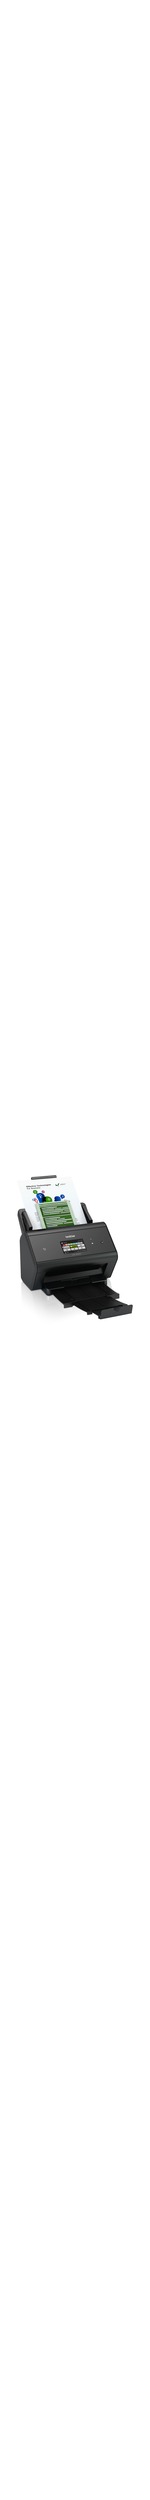 Brother ADS-3600W Sheetfed Scanner